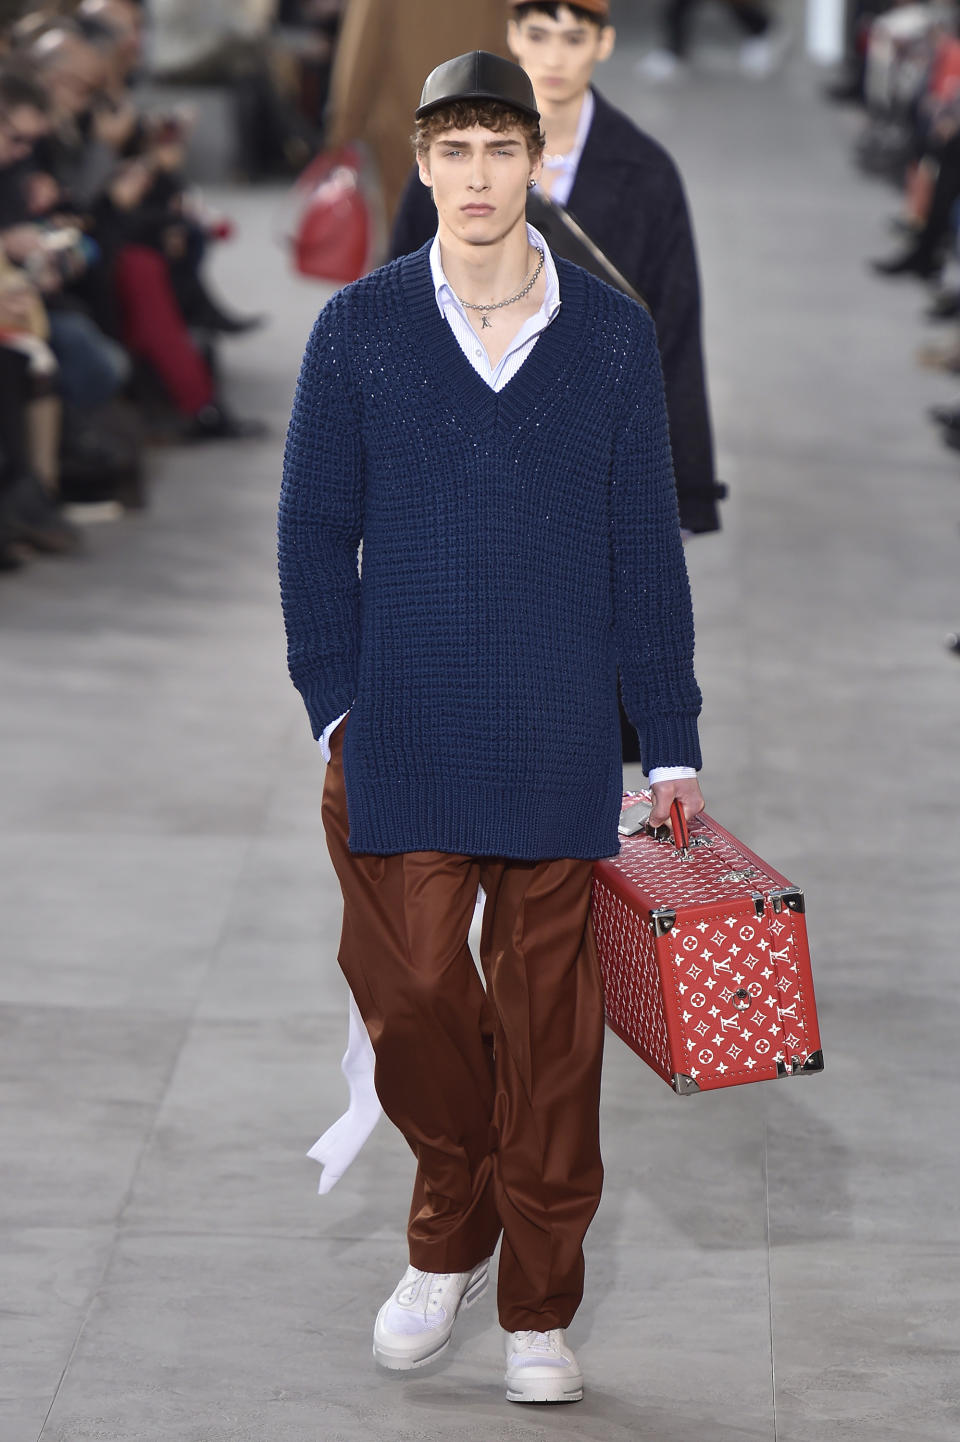 <p>Another major item from the Louis Vuitton-Supreme collection is the monogrammed trunk juxtaposed with a very “hypebeast” style outfit: baseball cap, oversize sweater, baggy trousers, and crisp white sneakers. (Photo: Catwalking) </p>